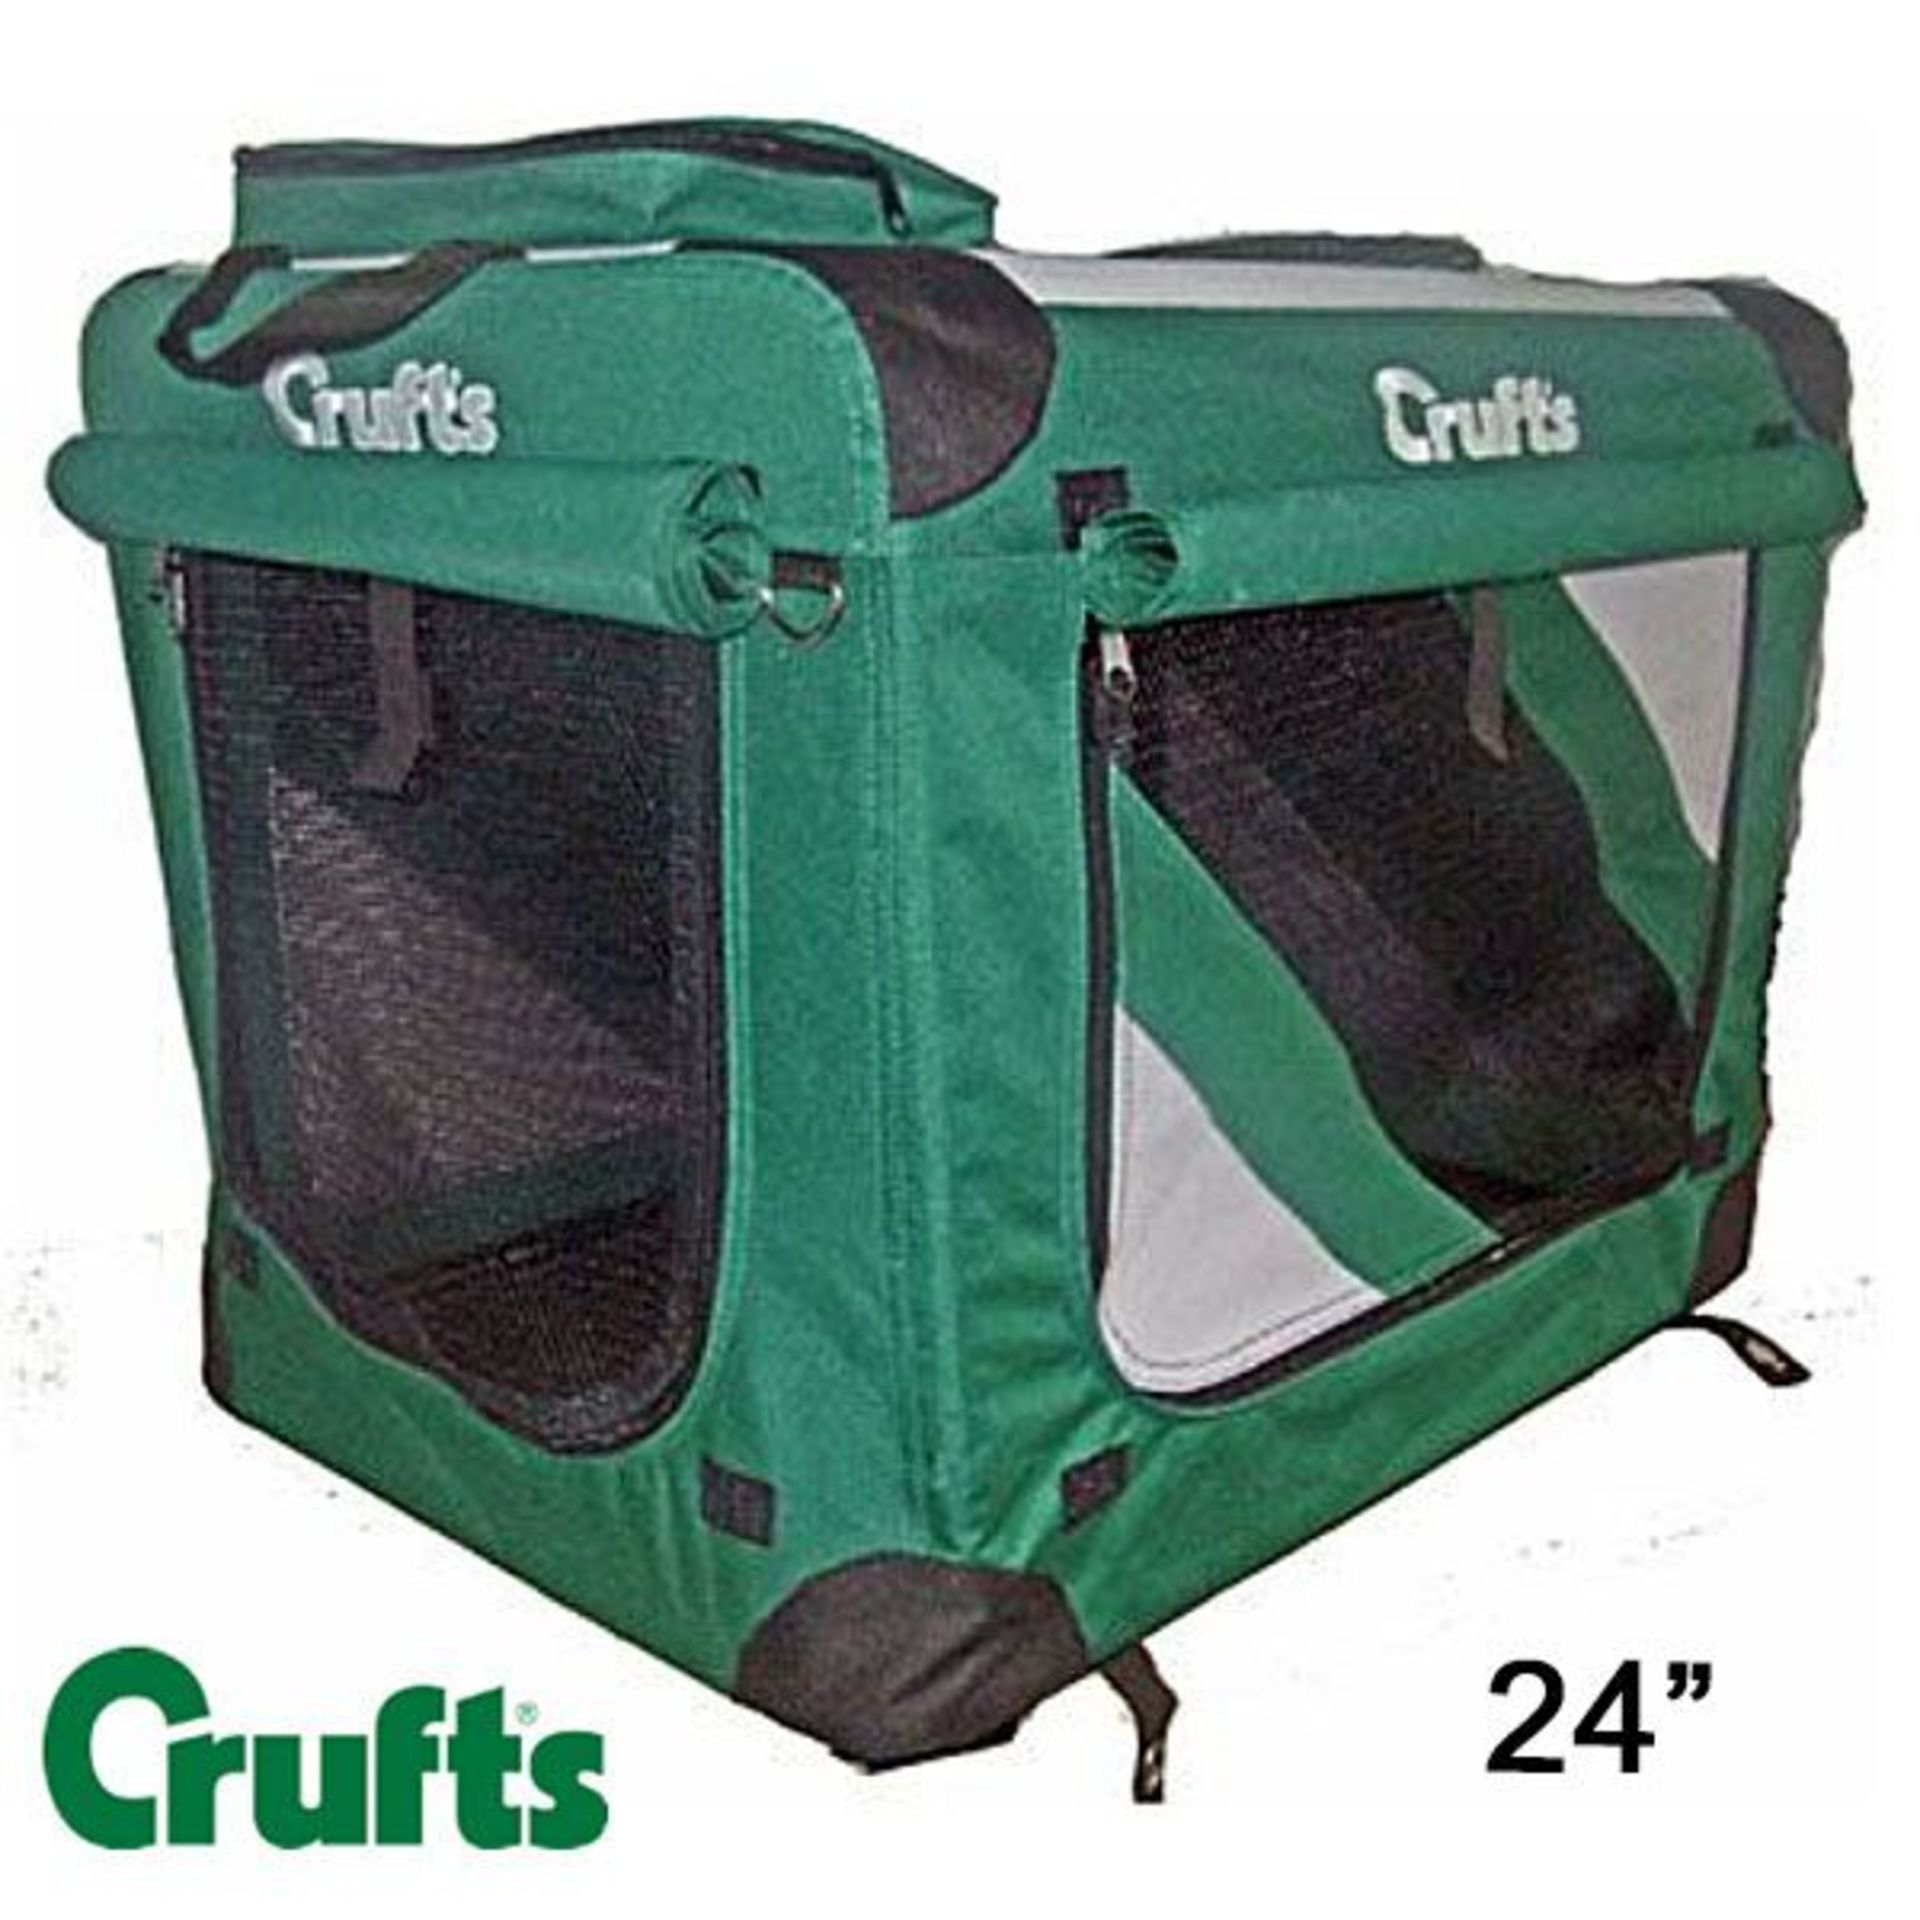 73 x 24" Crufts Soft Crate. Green/Grey. Total RRP £4,088